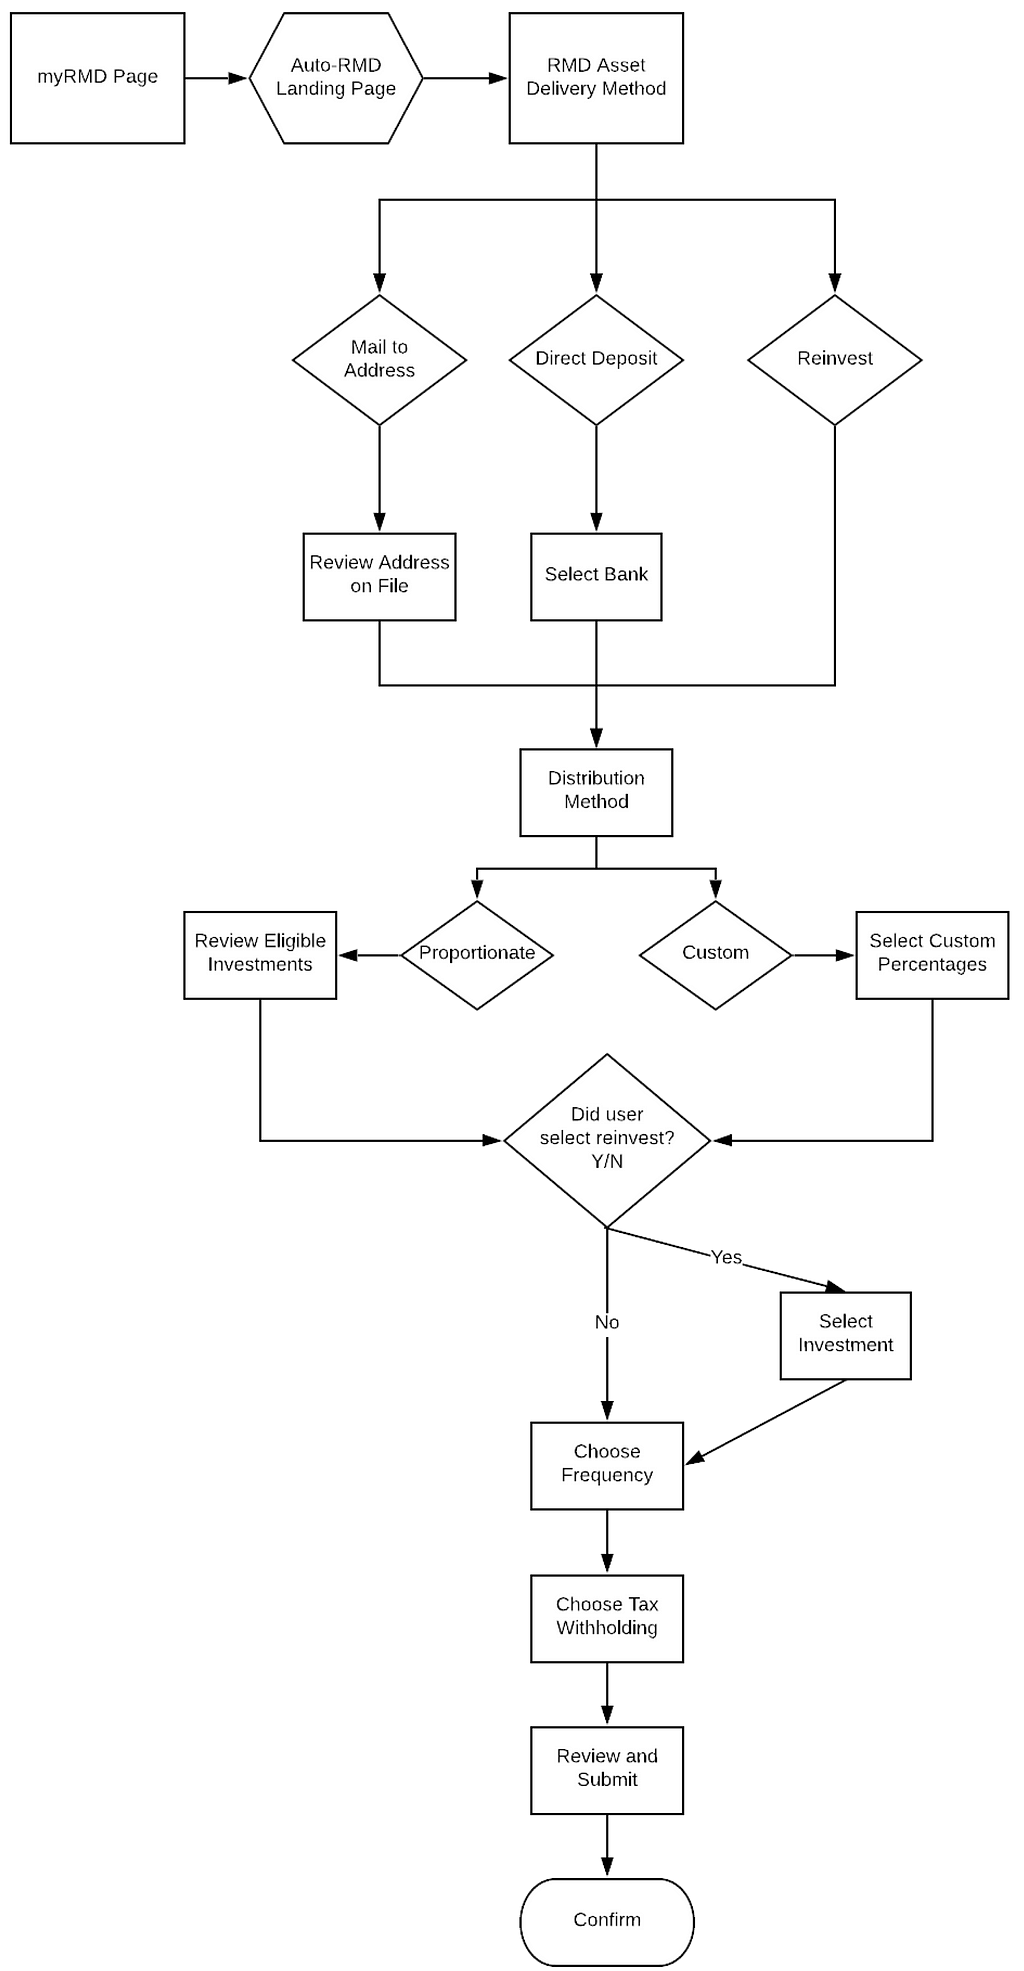 A workflow diagram detailing the full flow for the Automatic RMD experience.